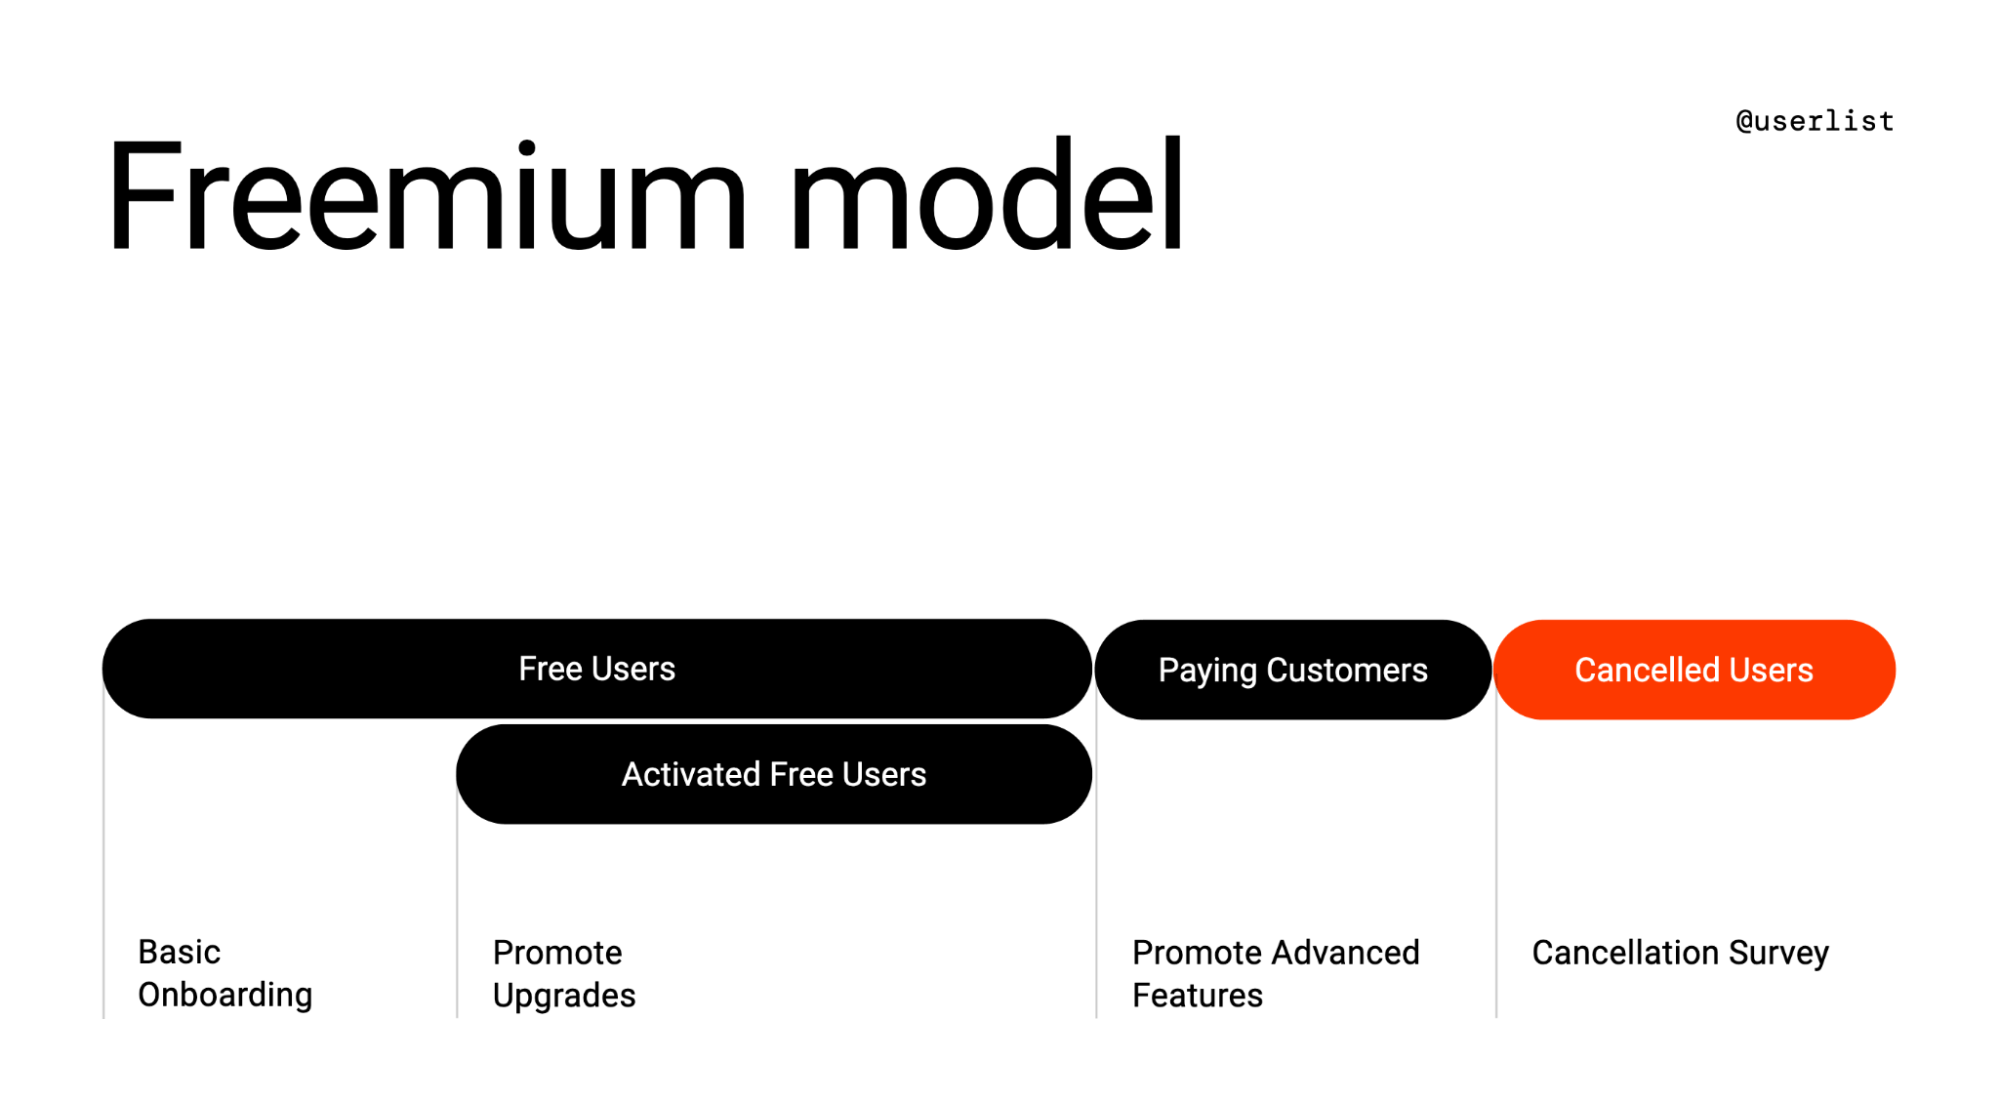 Self-Service SaaS User Onboarding: A segments map showing the freemium model